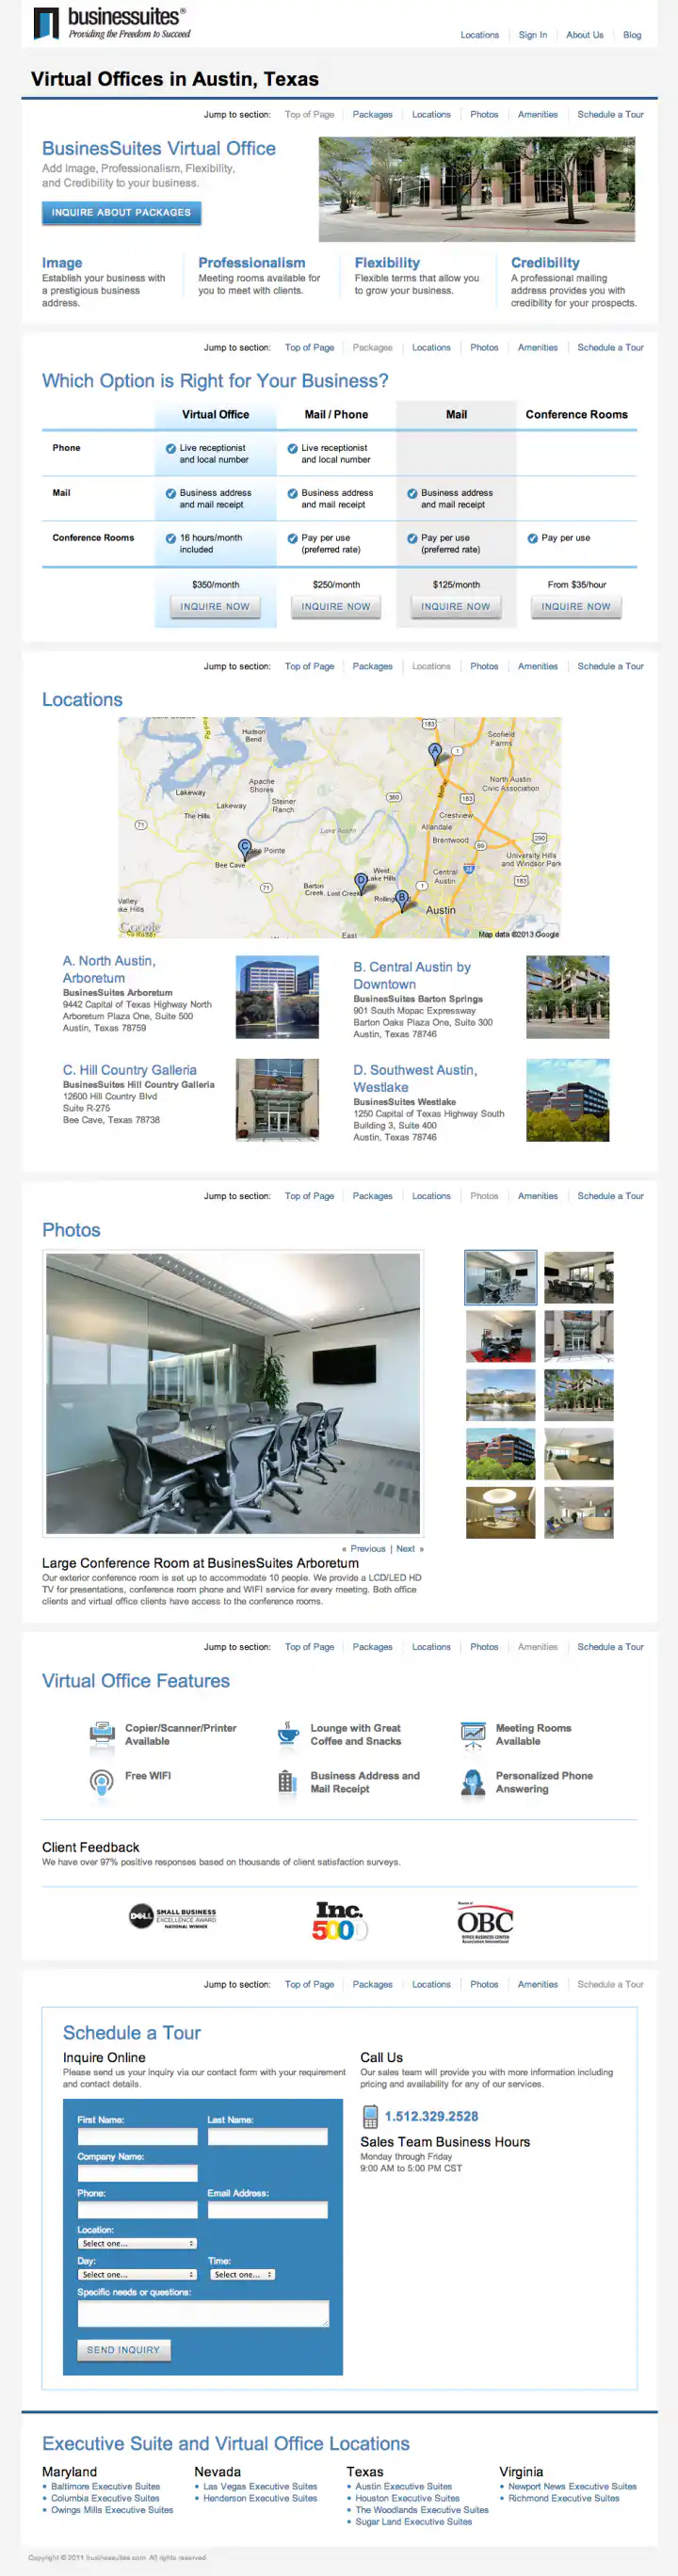 BusinesSuites Virtual Offices Page - version 2